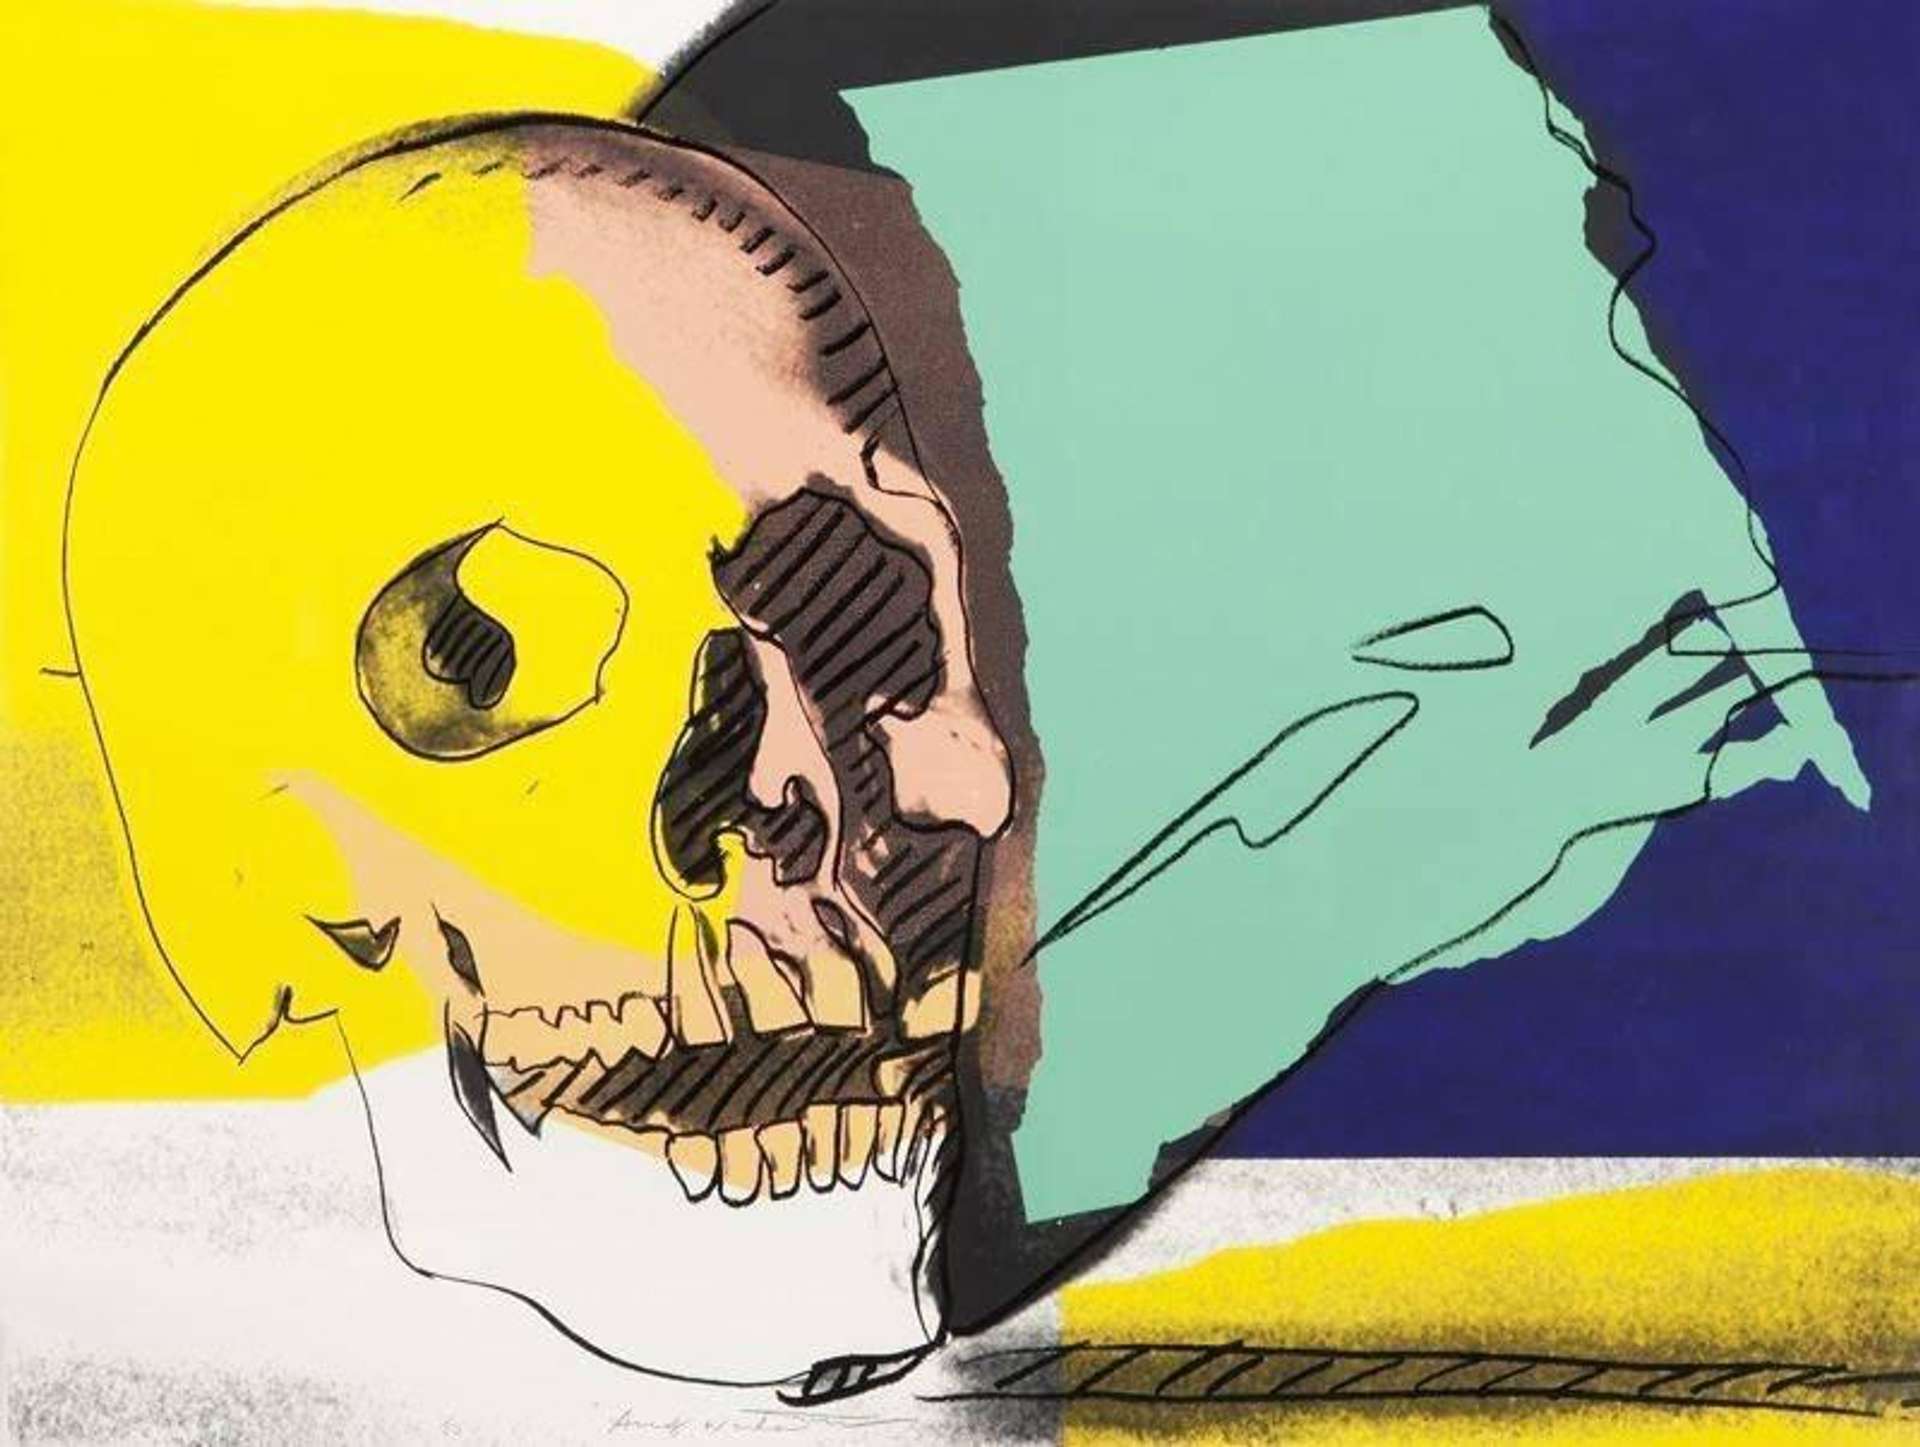 The print was produced by layering bright blocks of colour over a hand-drawn sketch of a human skull. The exuberance of the yellow, green and blue blocks of colour are at odds with the grave subject matter, giving the print an unsettling but striking character.